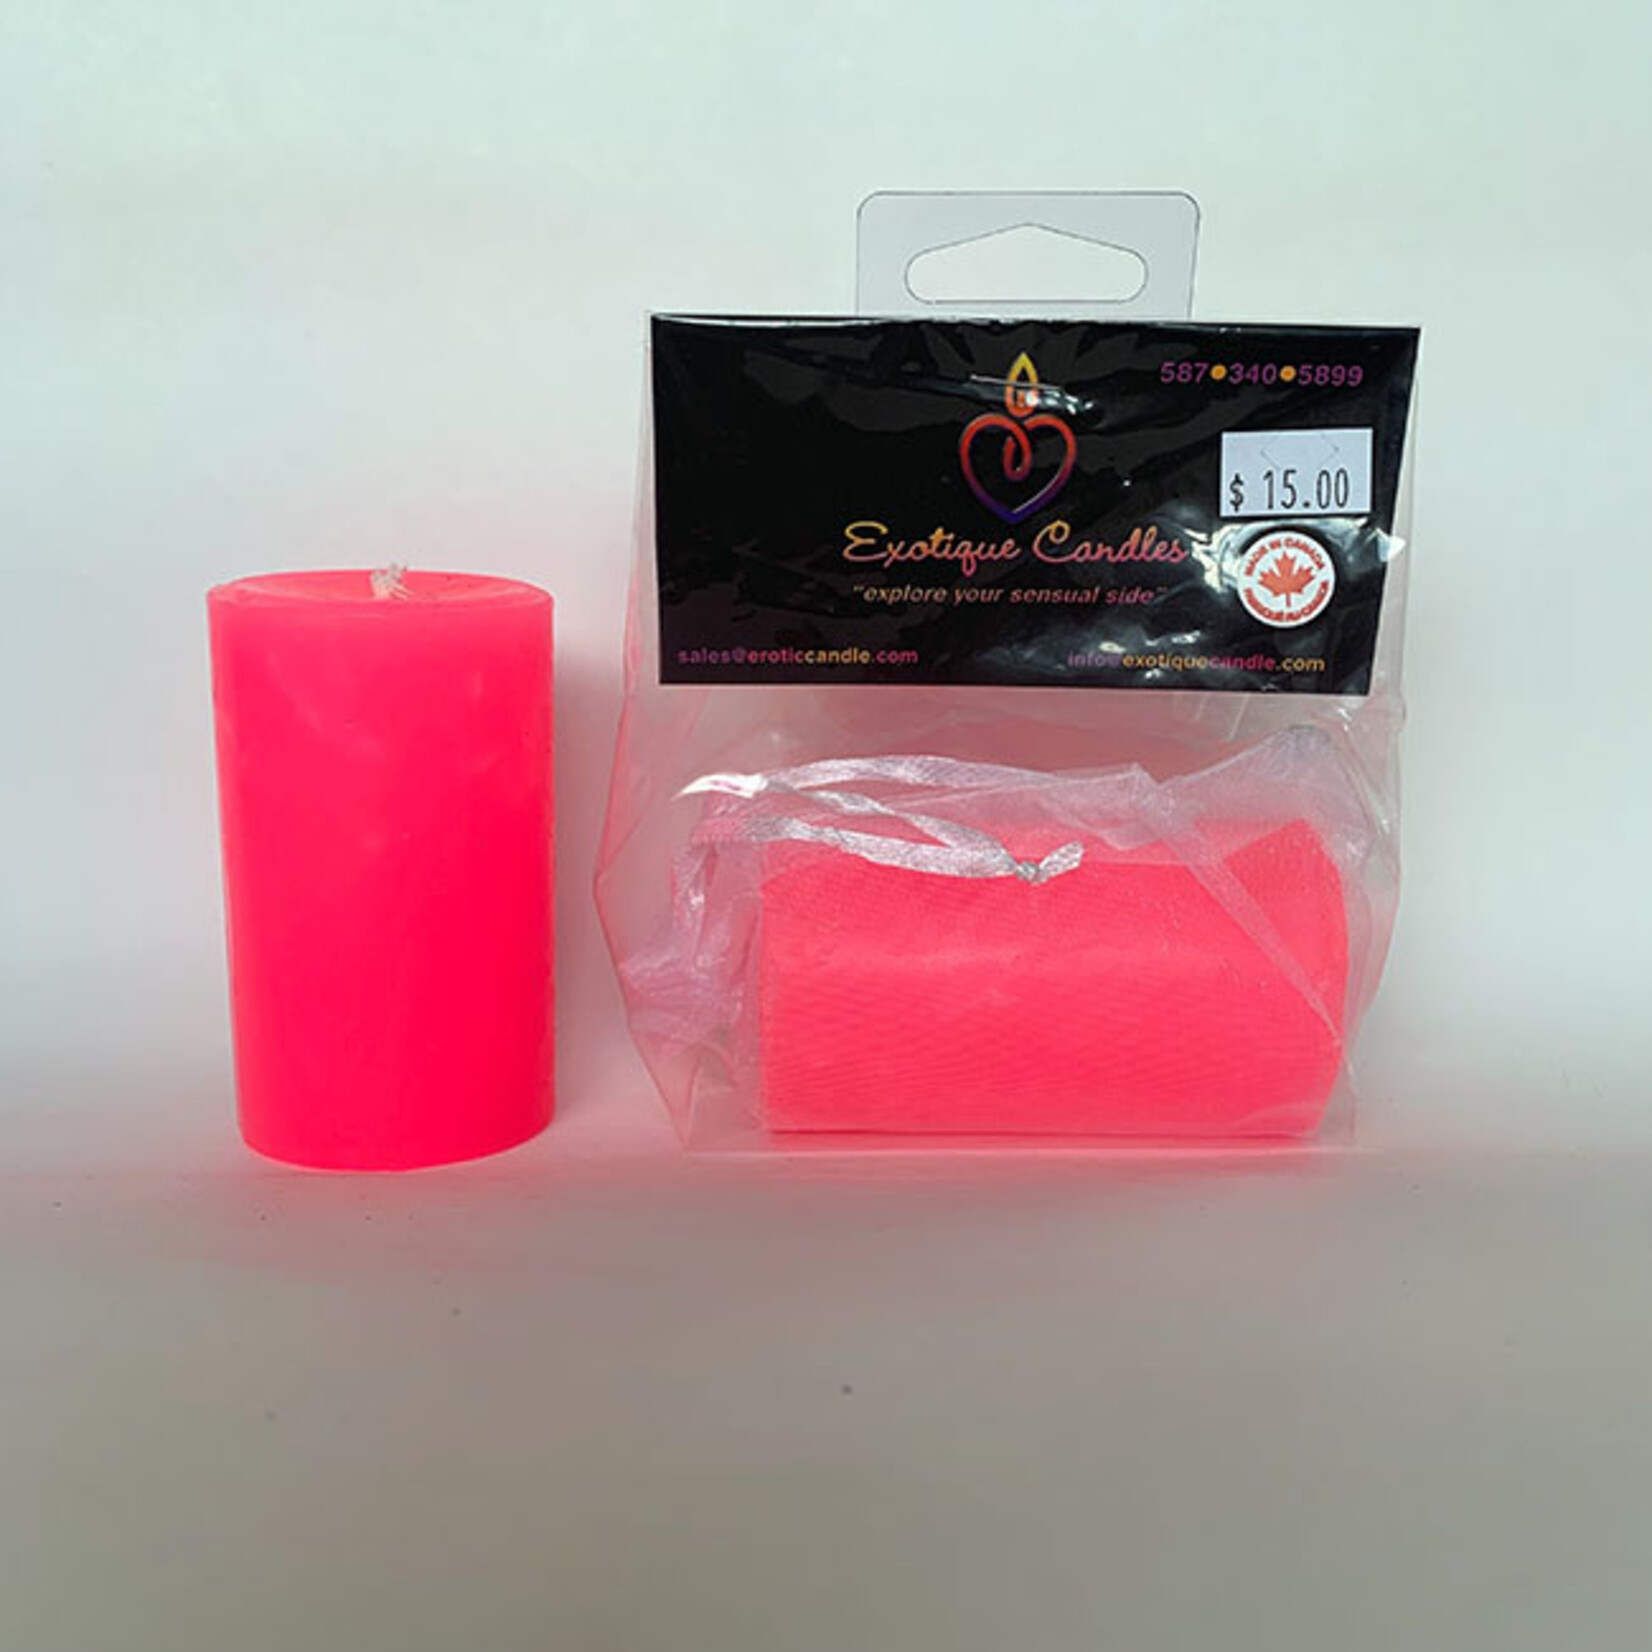 Exotique Candles Exotic Spa Candle 5.5oz